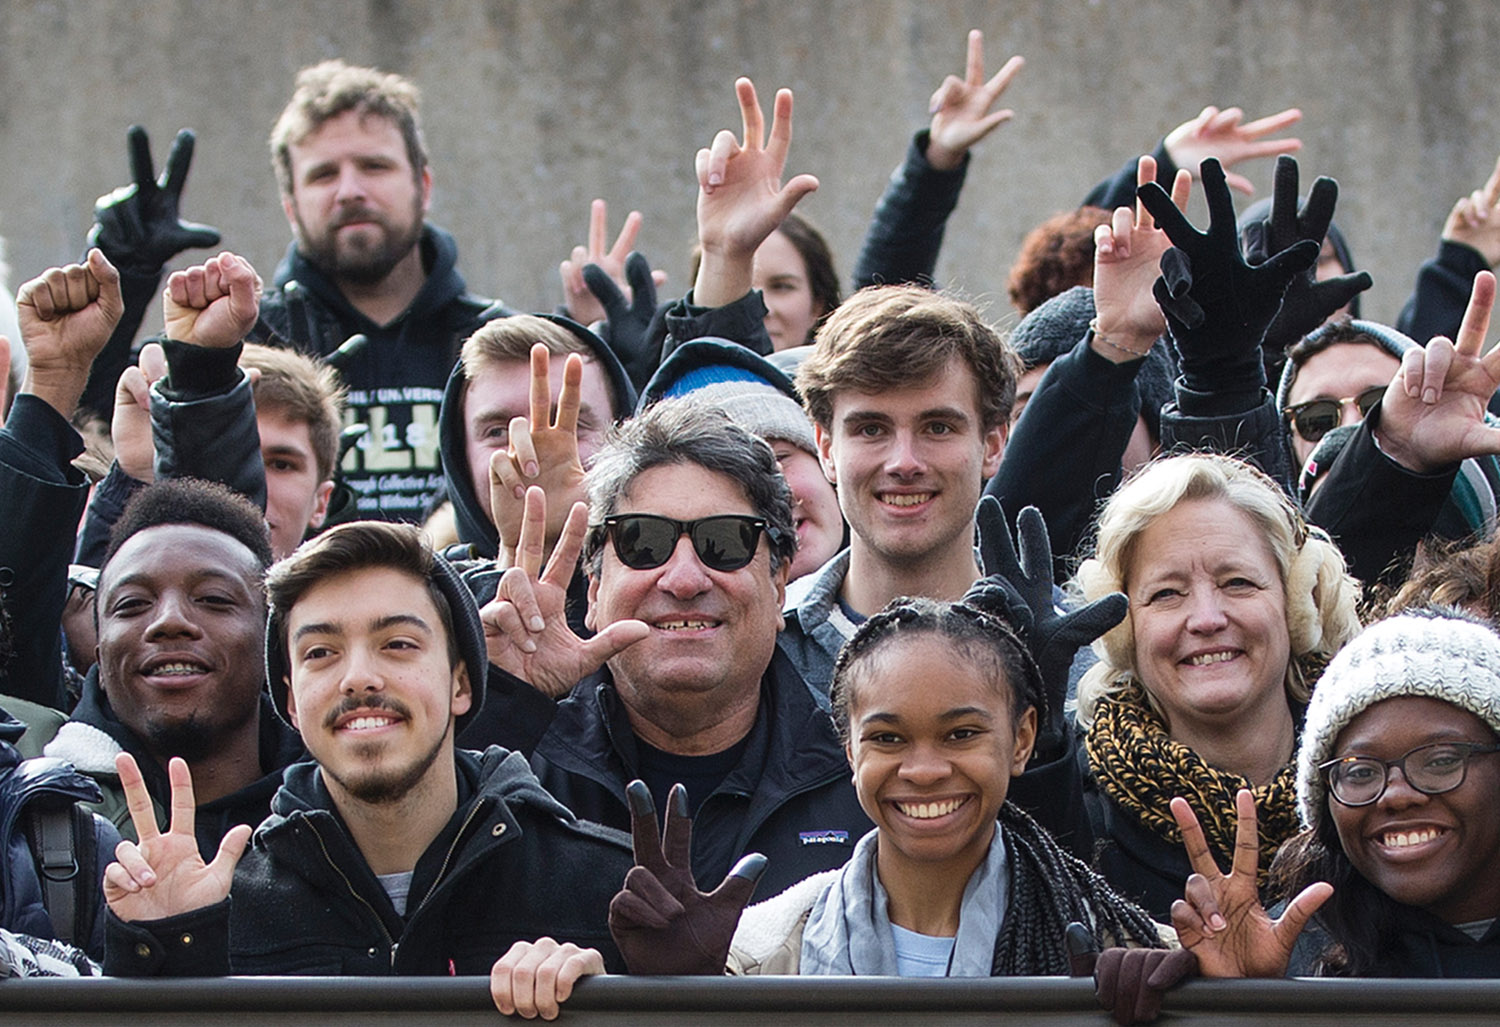 Zeppos joined members of the Vanderbilt community, including Provost and Vice Chancellor for Academic Affairs Susan R. Wente, to commemorate the life and legacy of Rev. Martin Luther King Jr. at the 2018 Nashville Freedom March in January. (JOE HOWELL)